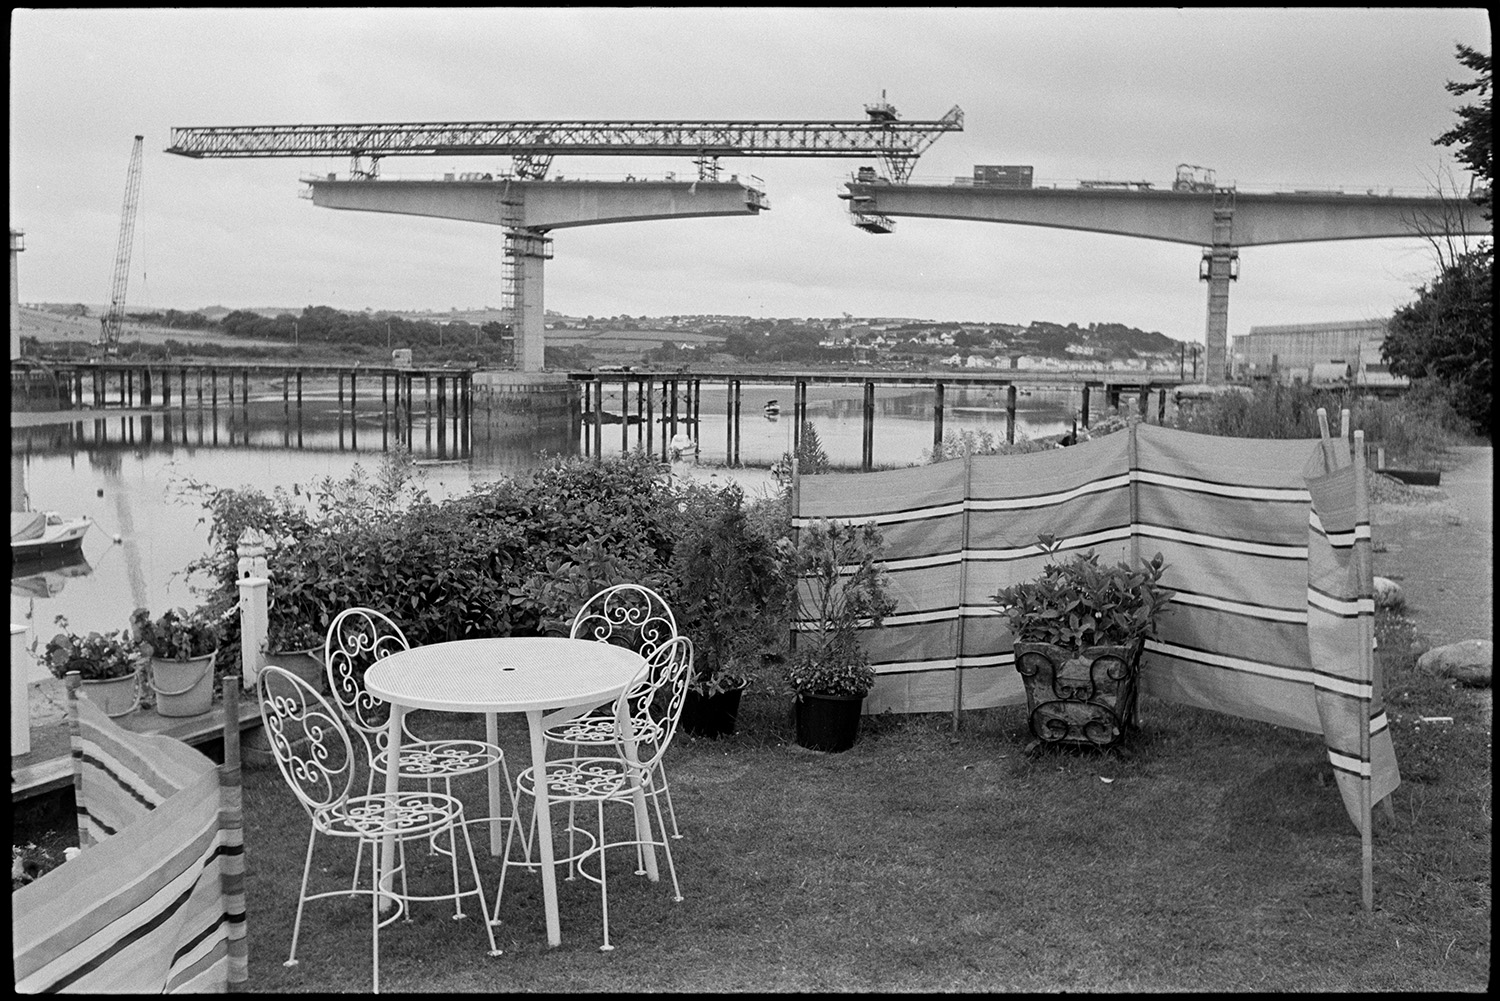 River views with new bridge being built, men digging worms for bait, boats. Garden chairs. 
[A garden with wind breaks, plant pots and a garden table and chairs by the River Torridge at Bideford. Cranes can be seen constructing Bideford New Bridge in the background, and a few boats are on the river.]